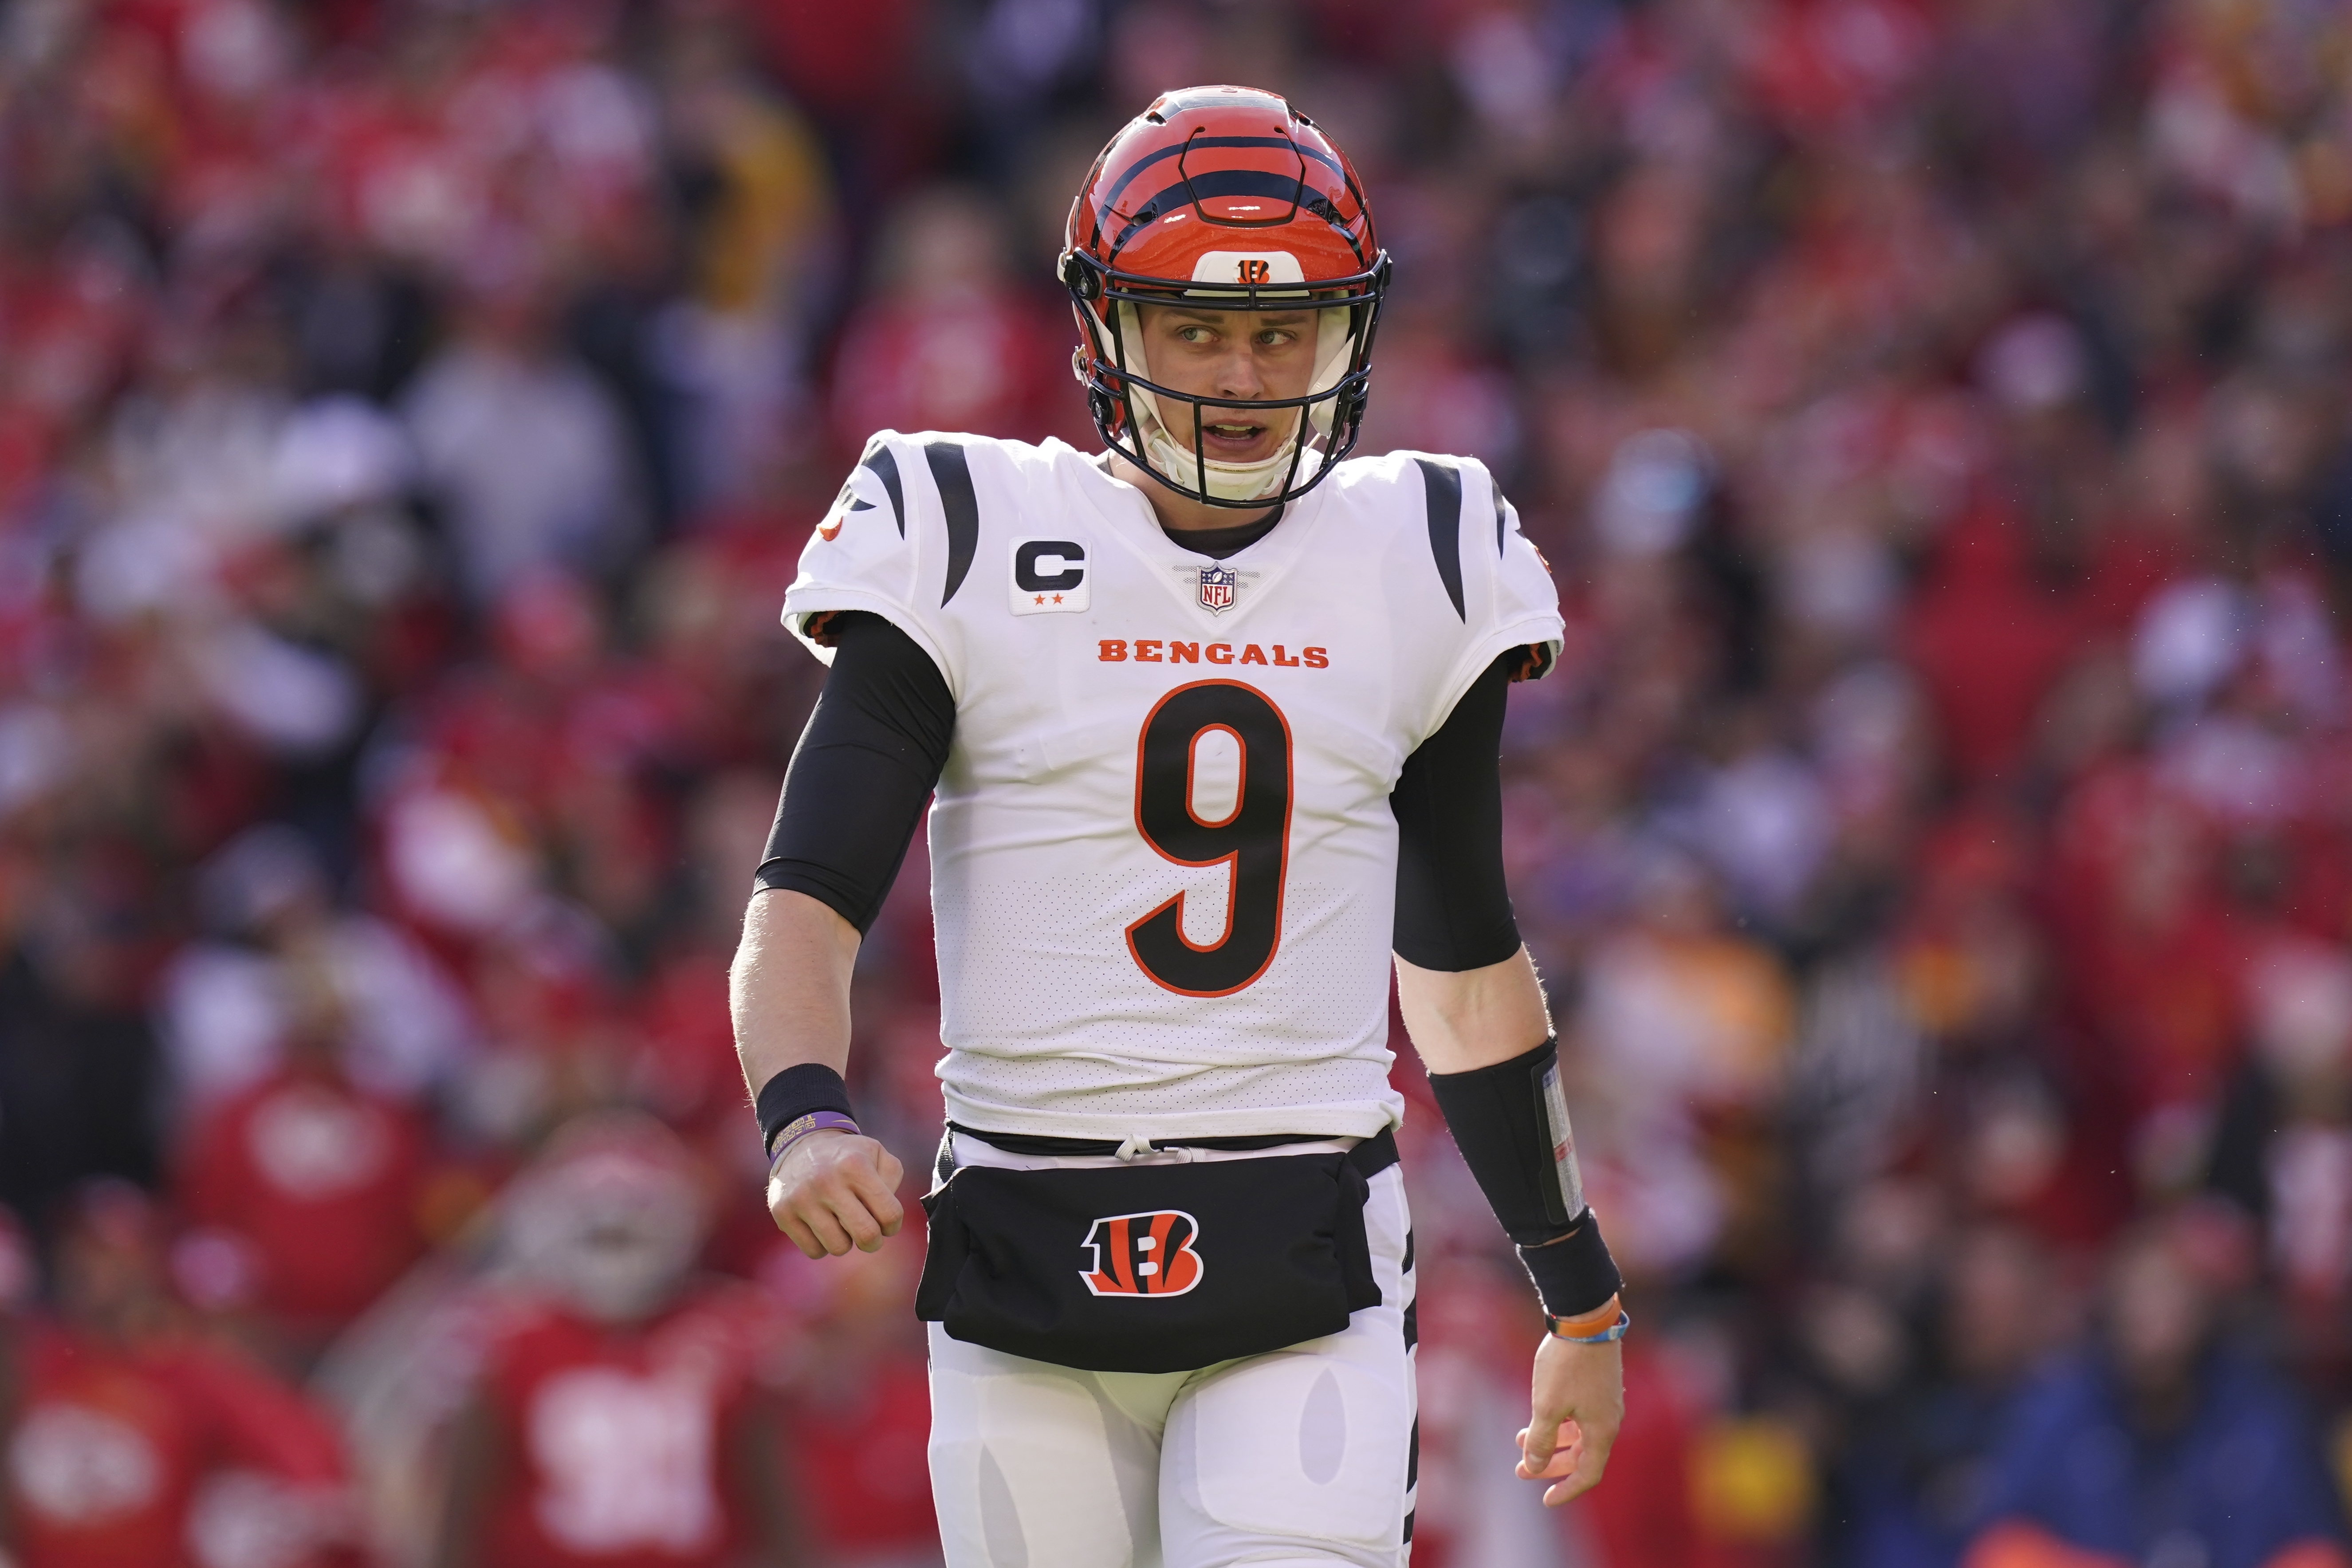 Highlights from Bengals' win over the Chiefs in AFC Championship Game